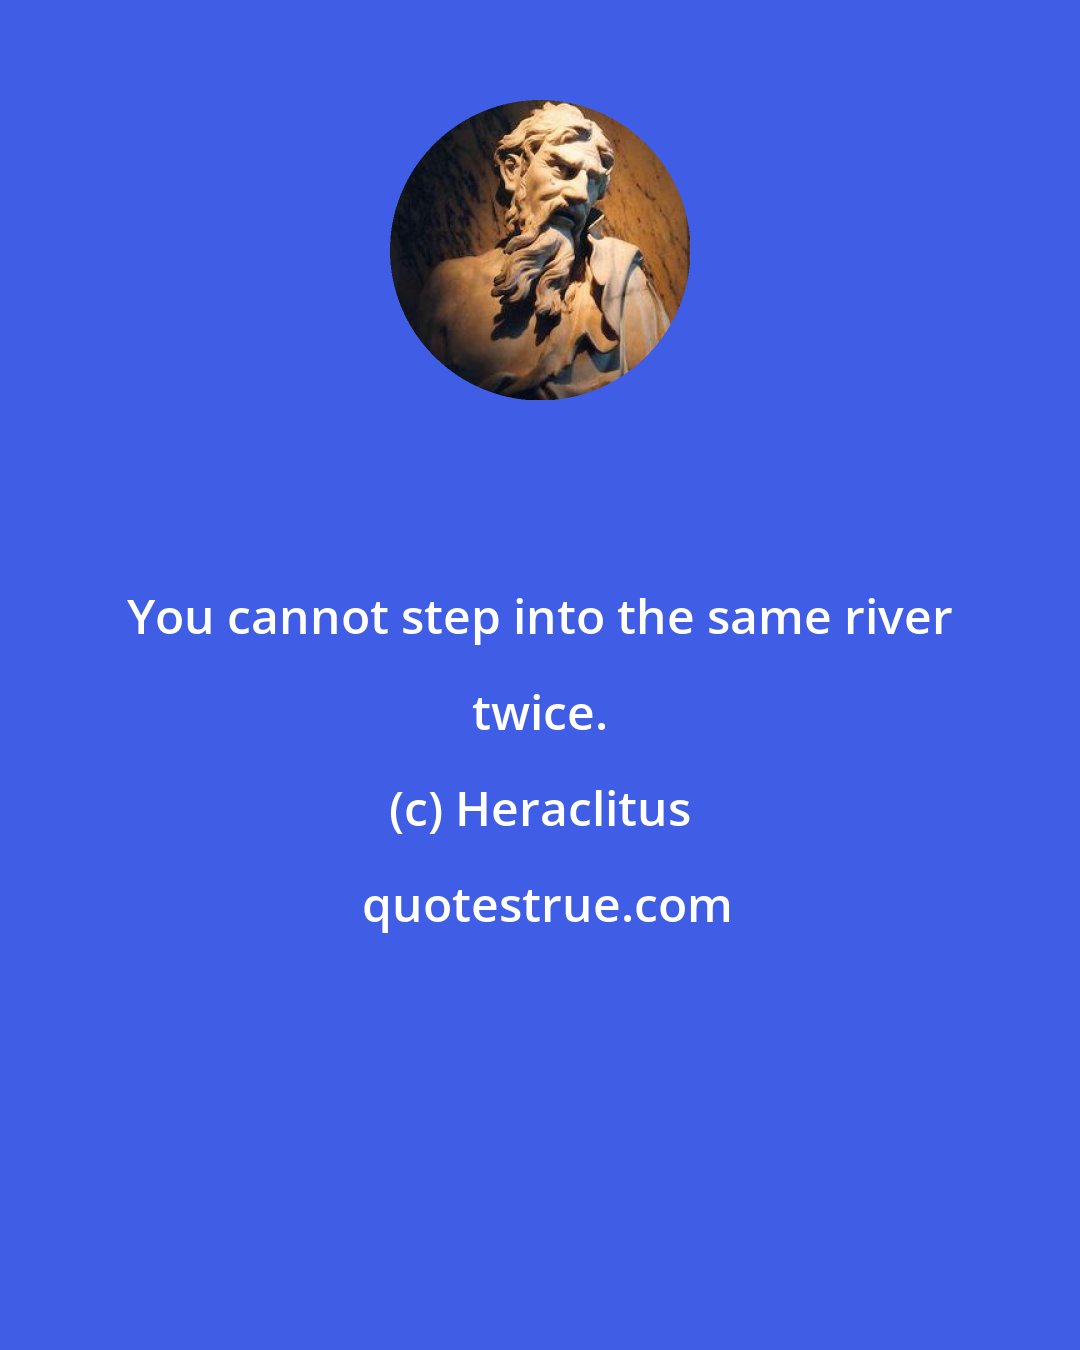 Heraclitus: You cannot step into the same river twice.